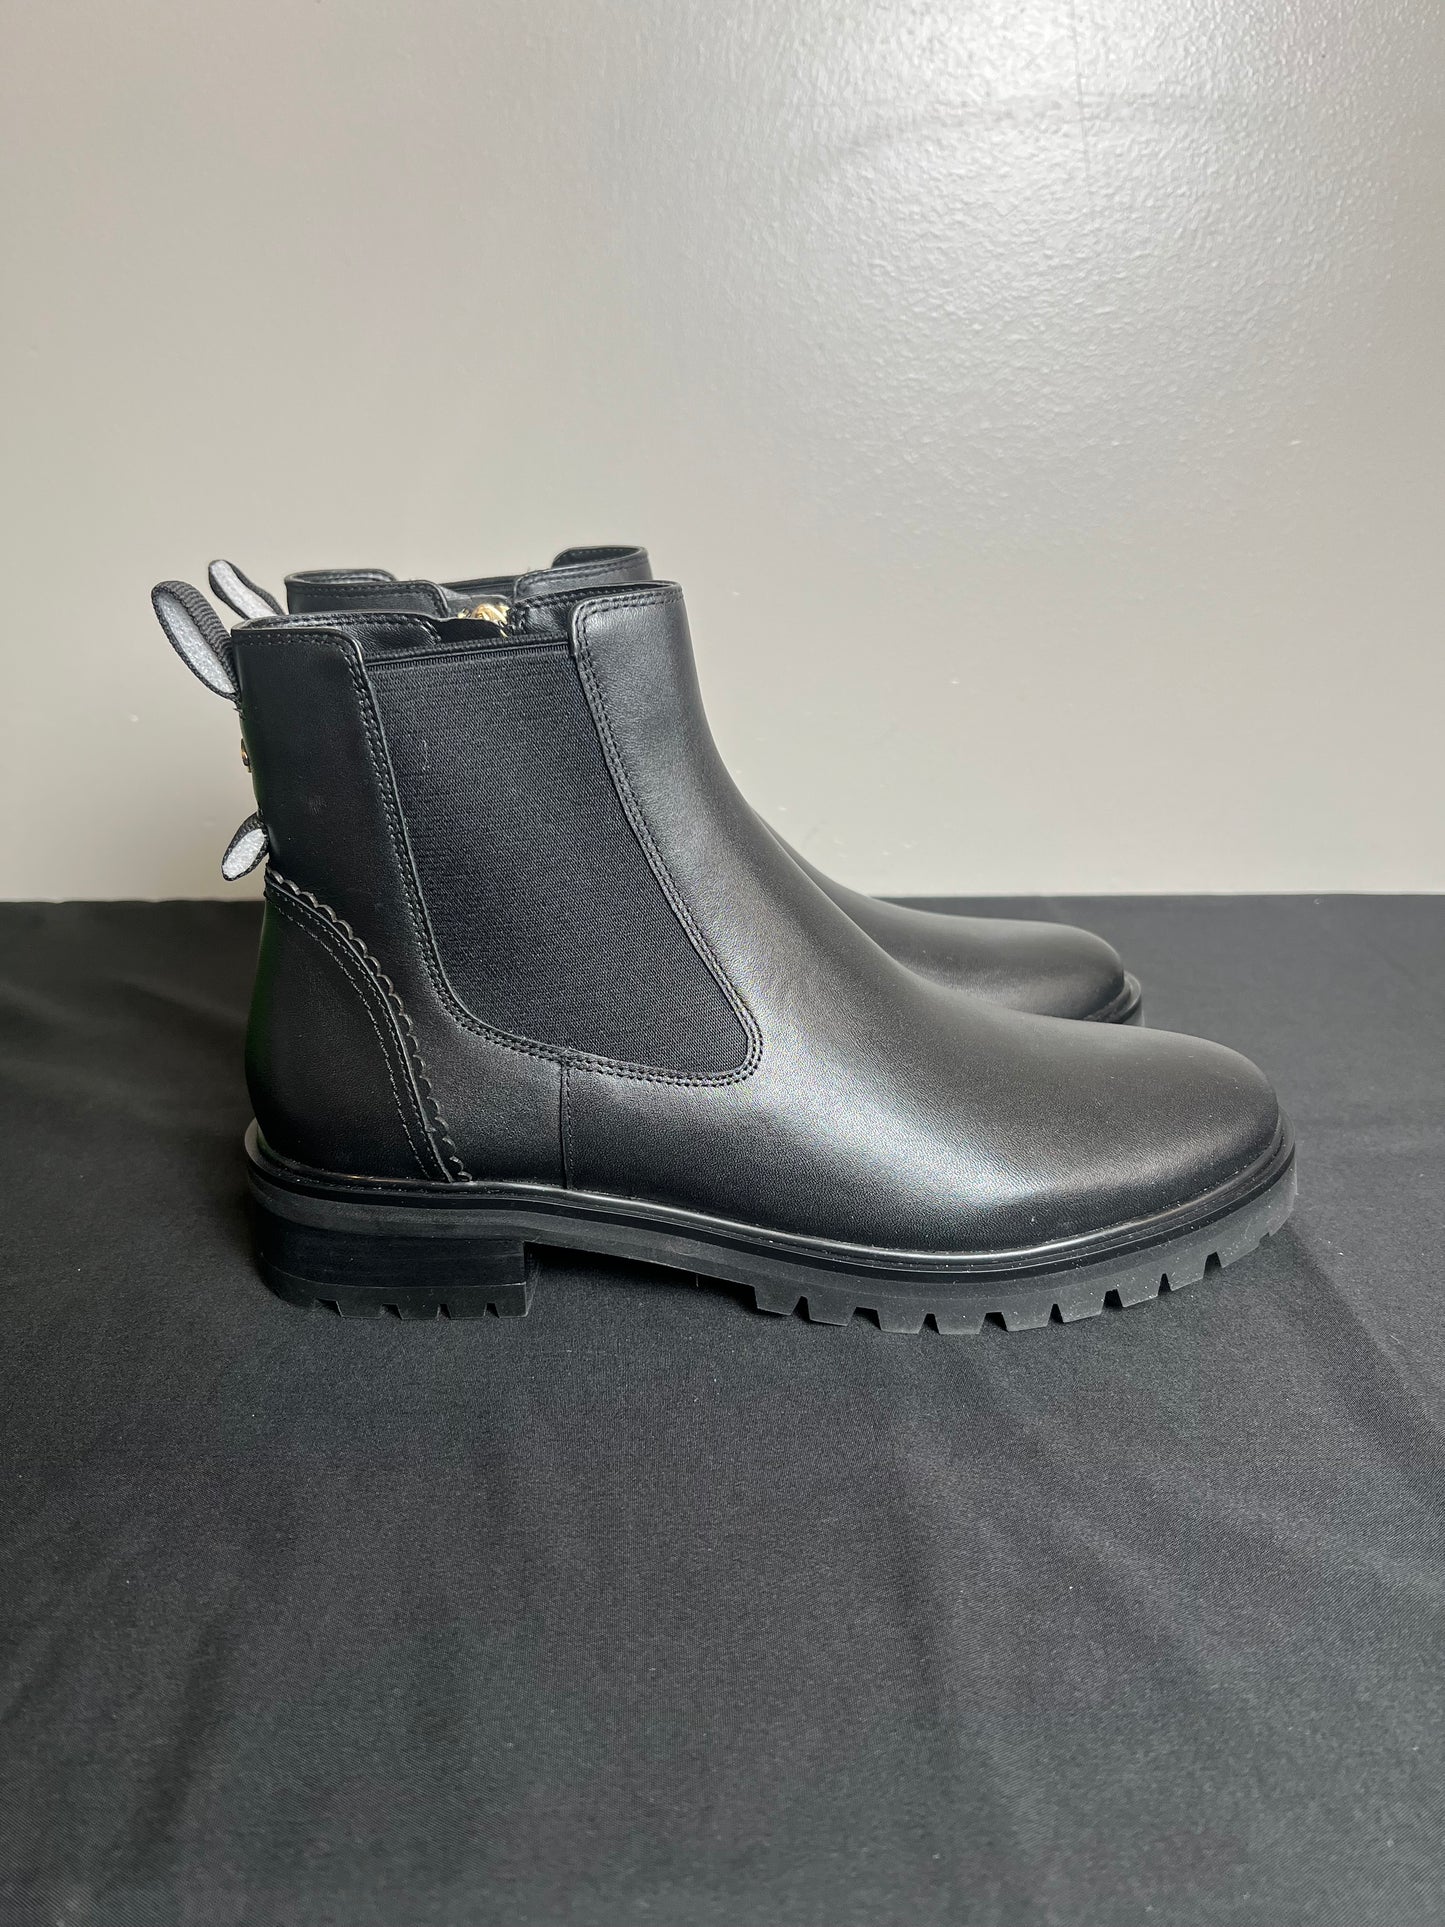 Boots Designer By Kate Spade  Size: 7.5